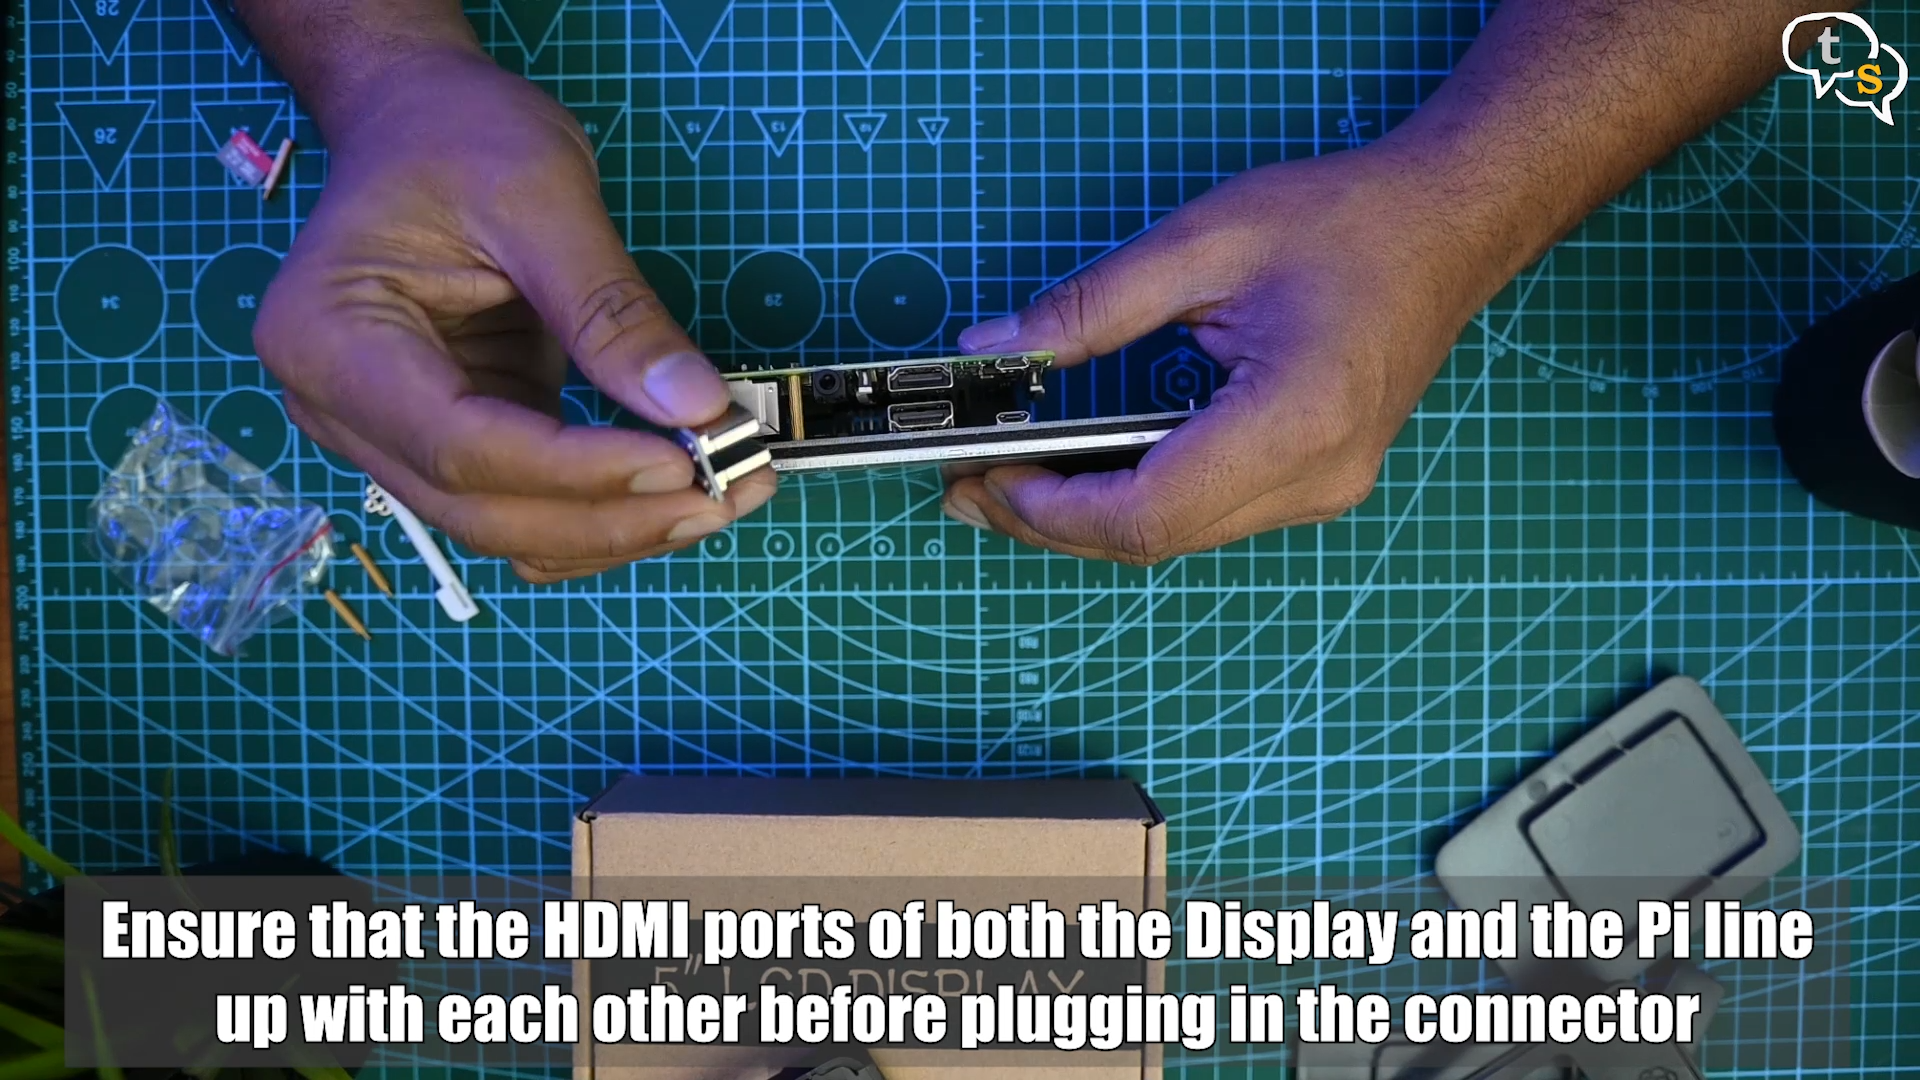 Connect HDMI to HDMI connector between Raspberry Pi and the 5 inch touchscreen display